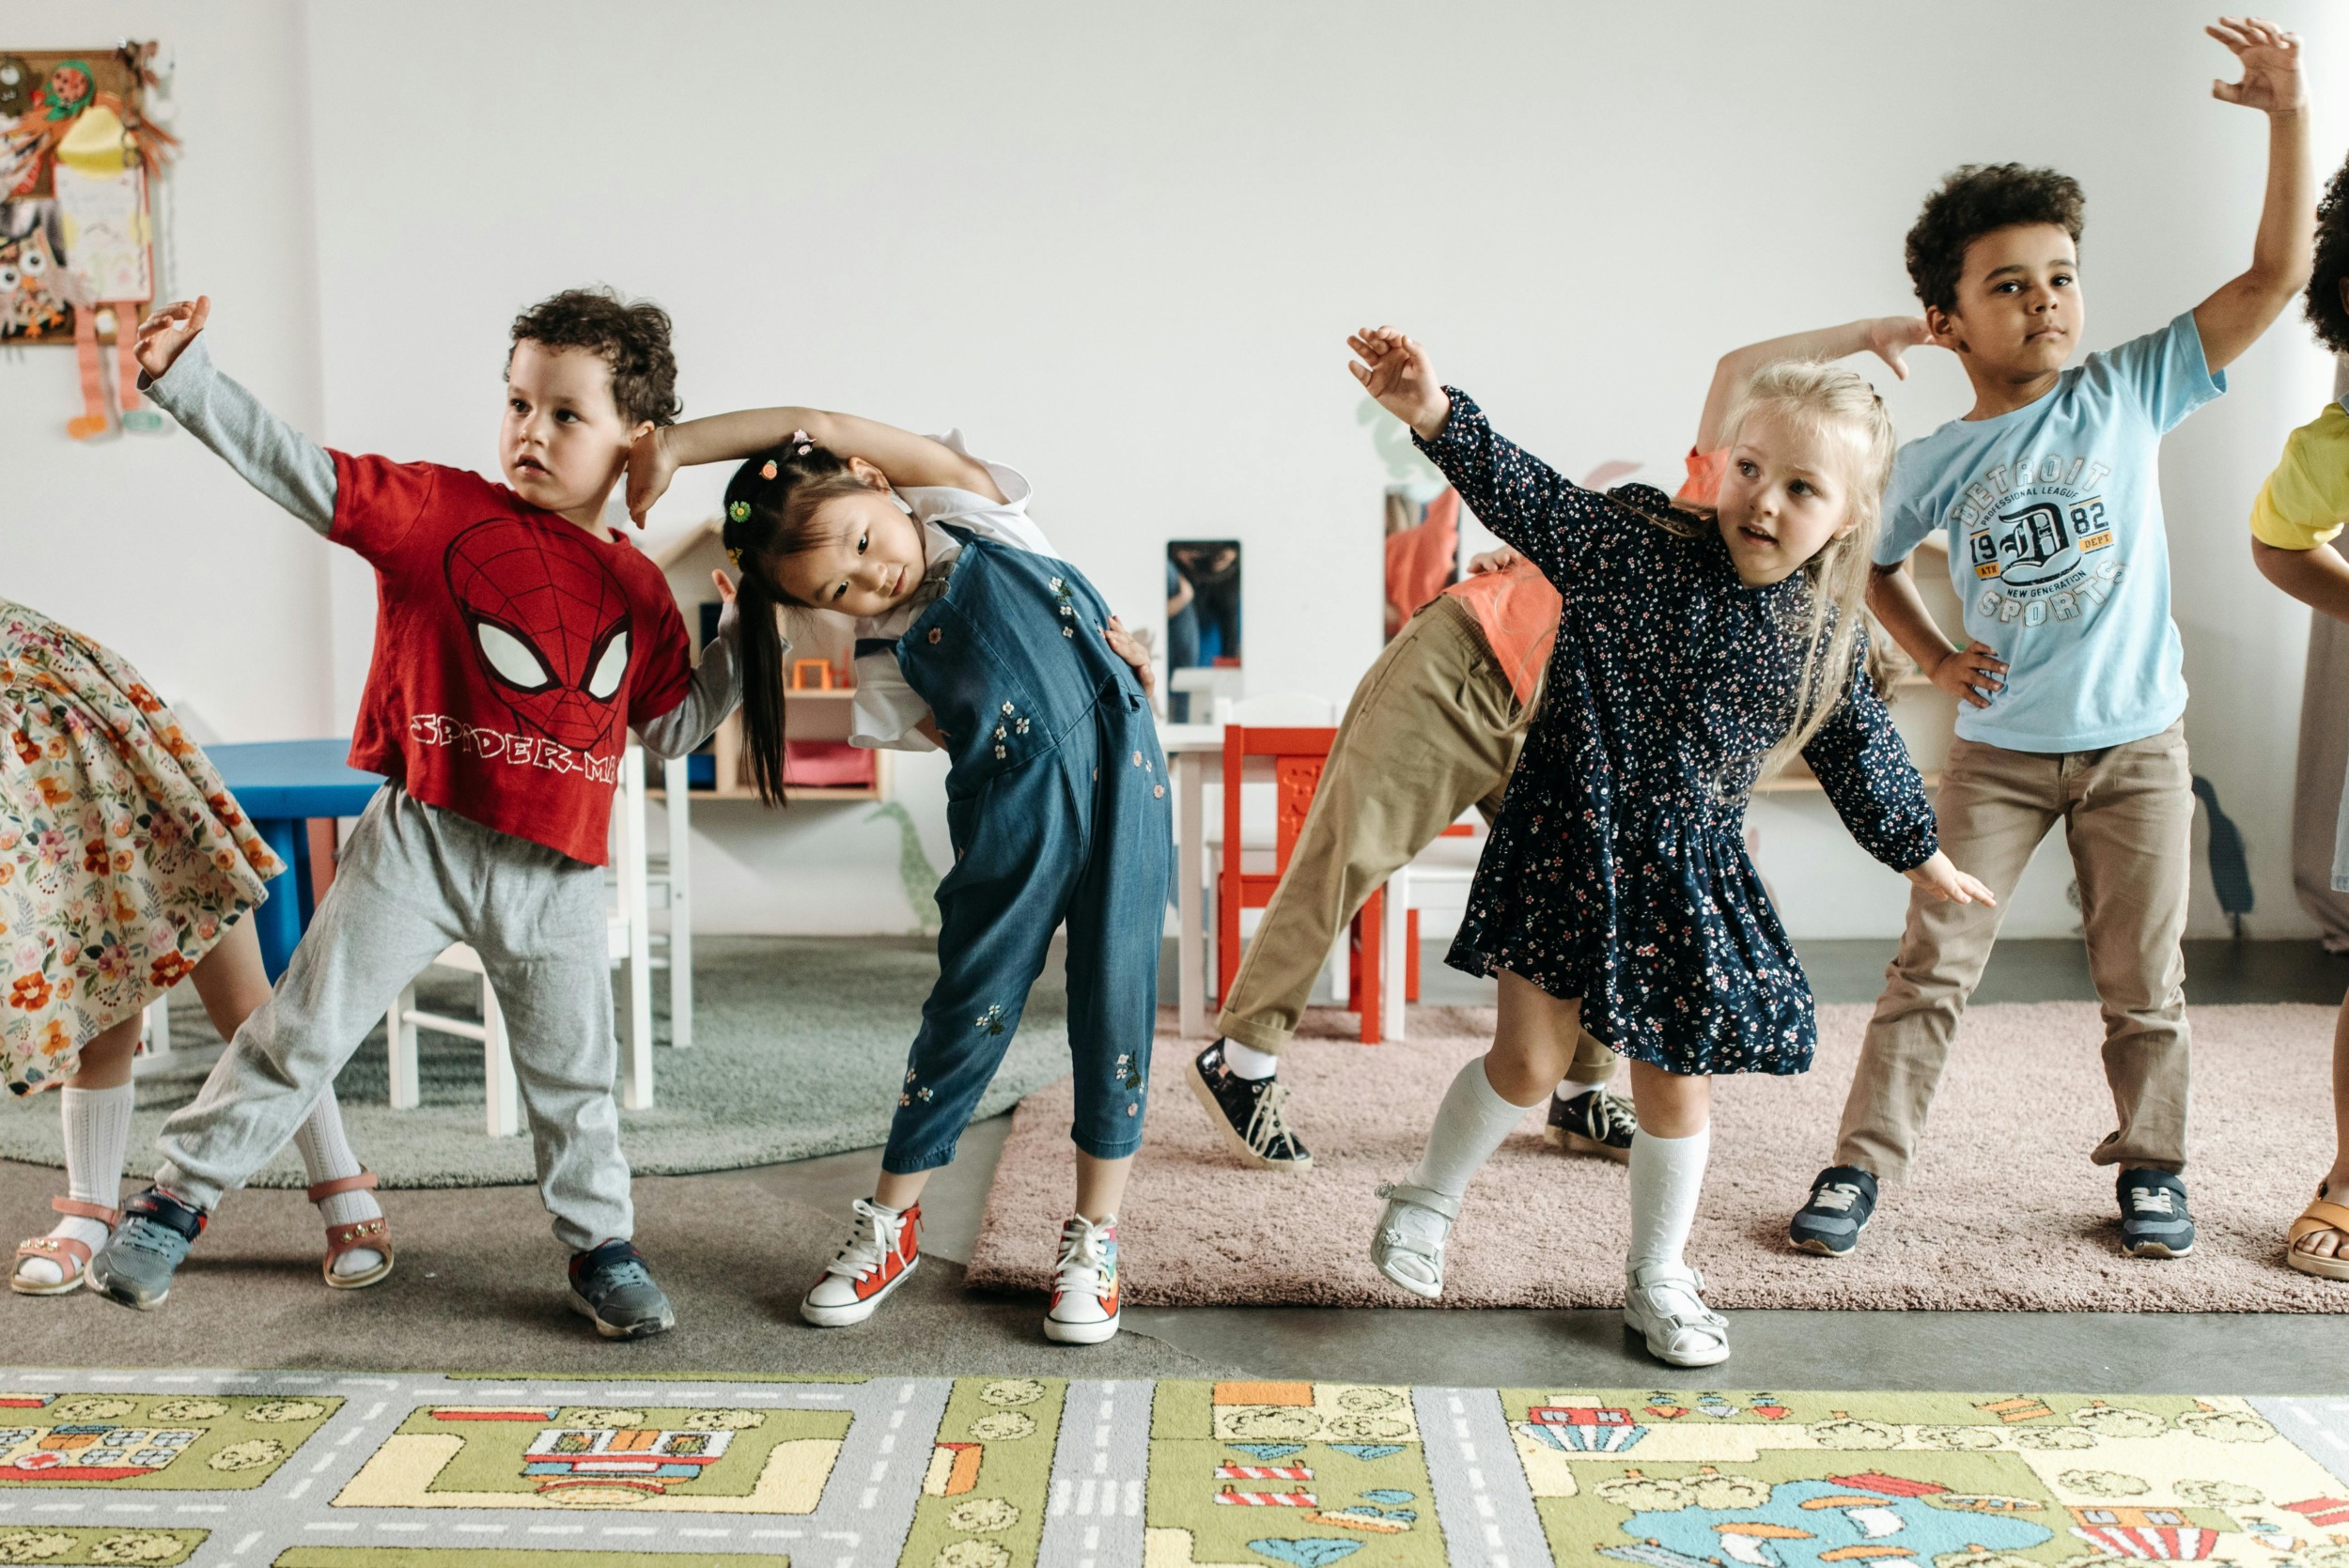 Childcare private equity regulations: Several early primary kids dance and stretch while in a line inside pre-school classroom